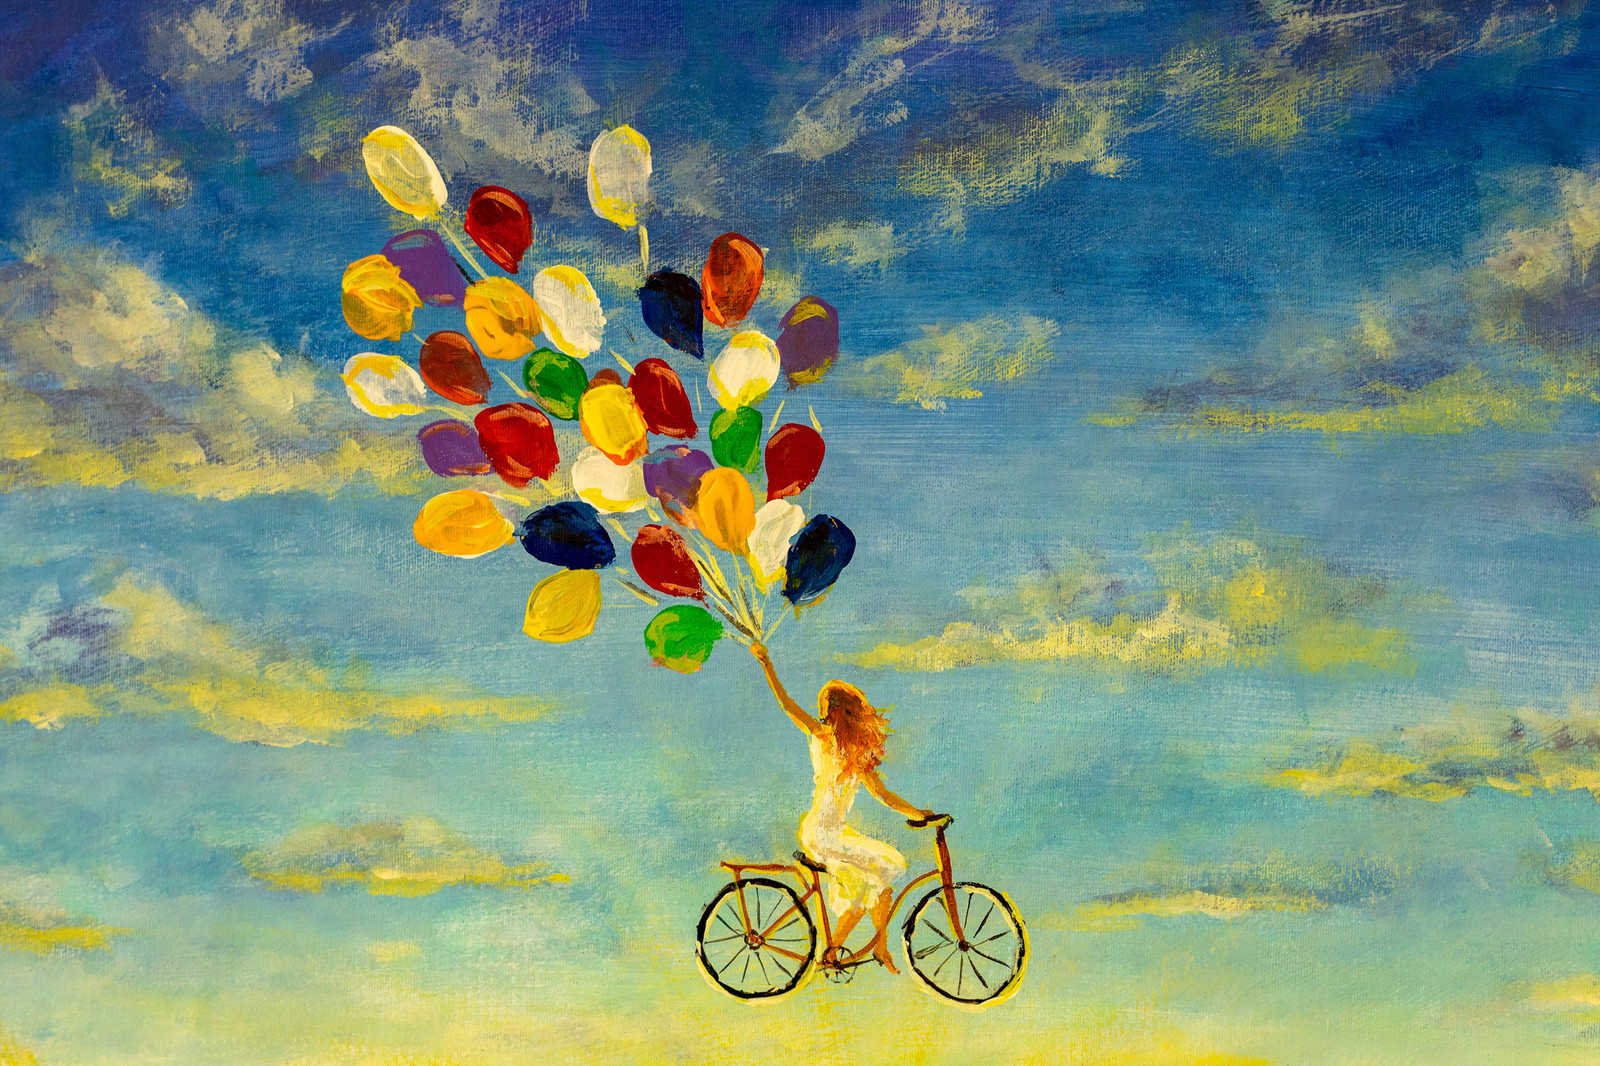             Canvas painting with Woman on Bicycle in the Sky Painting - 0.90 m x 0.60 m
        